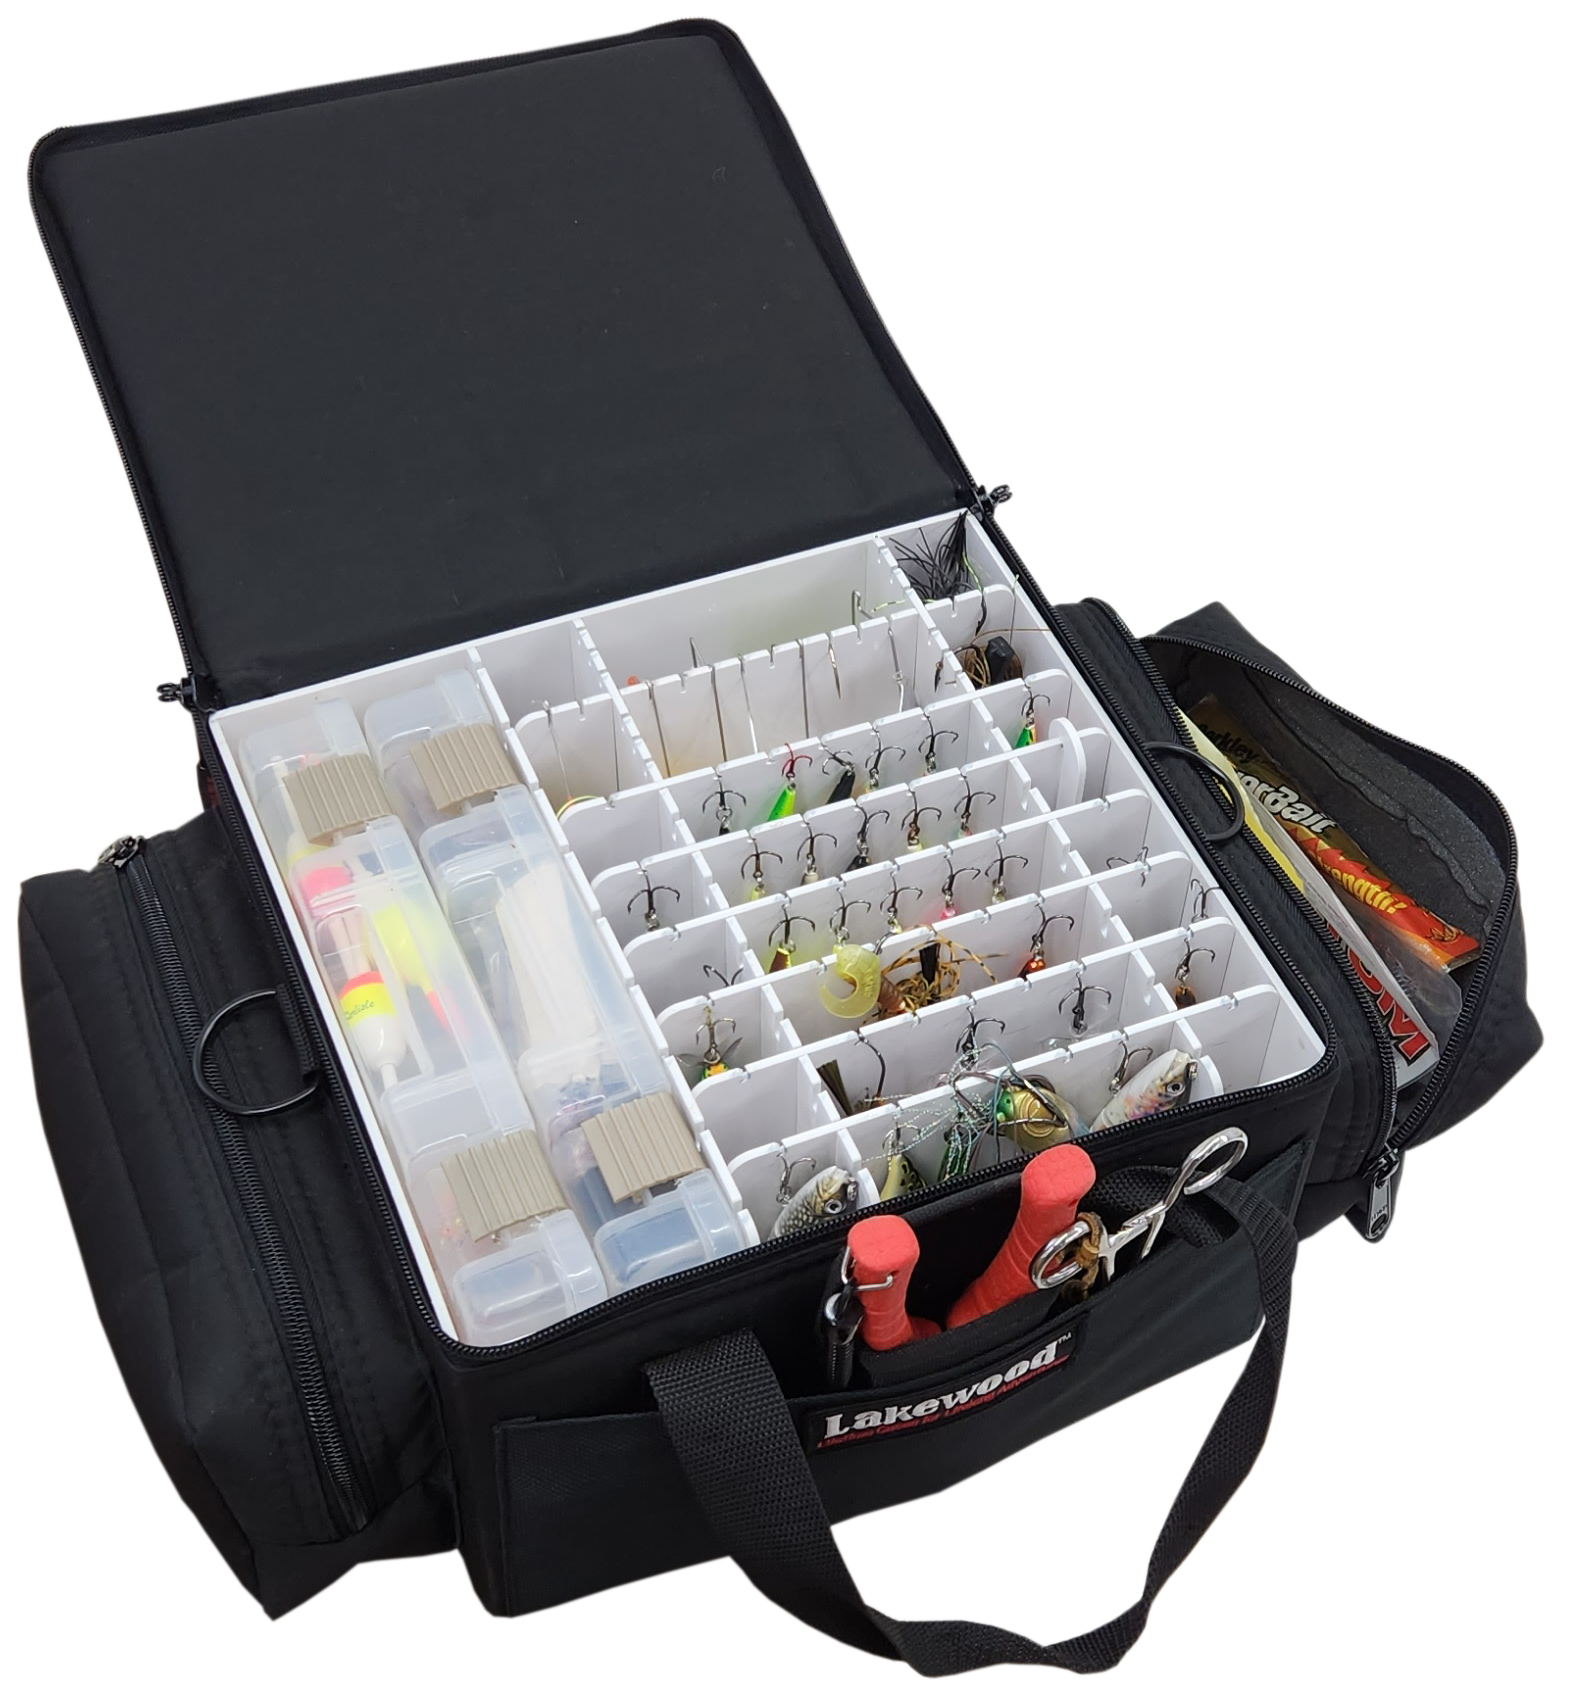 Billfold - Mesh Zippered Bag Storage Solution for plastics - Lakewood  Products